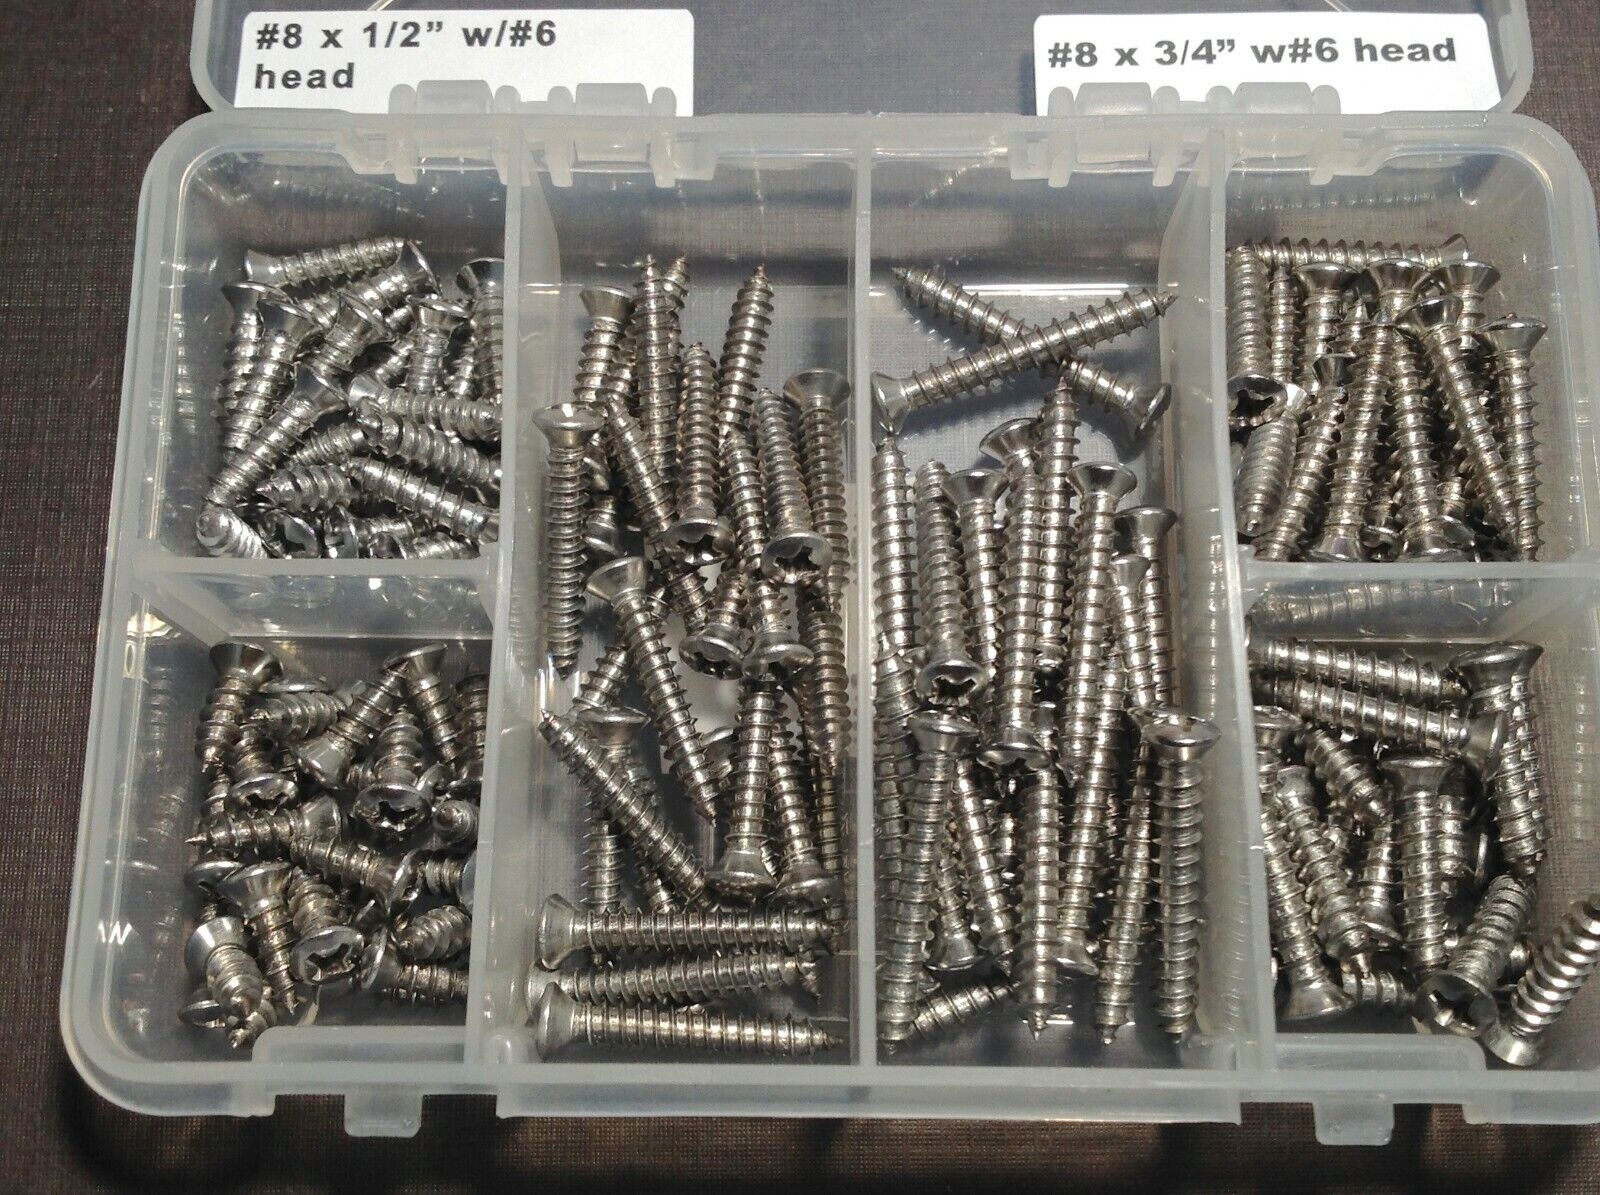 150pc GM #8 w/#6 phillips oval head stainless garnish moulding screws assortment